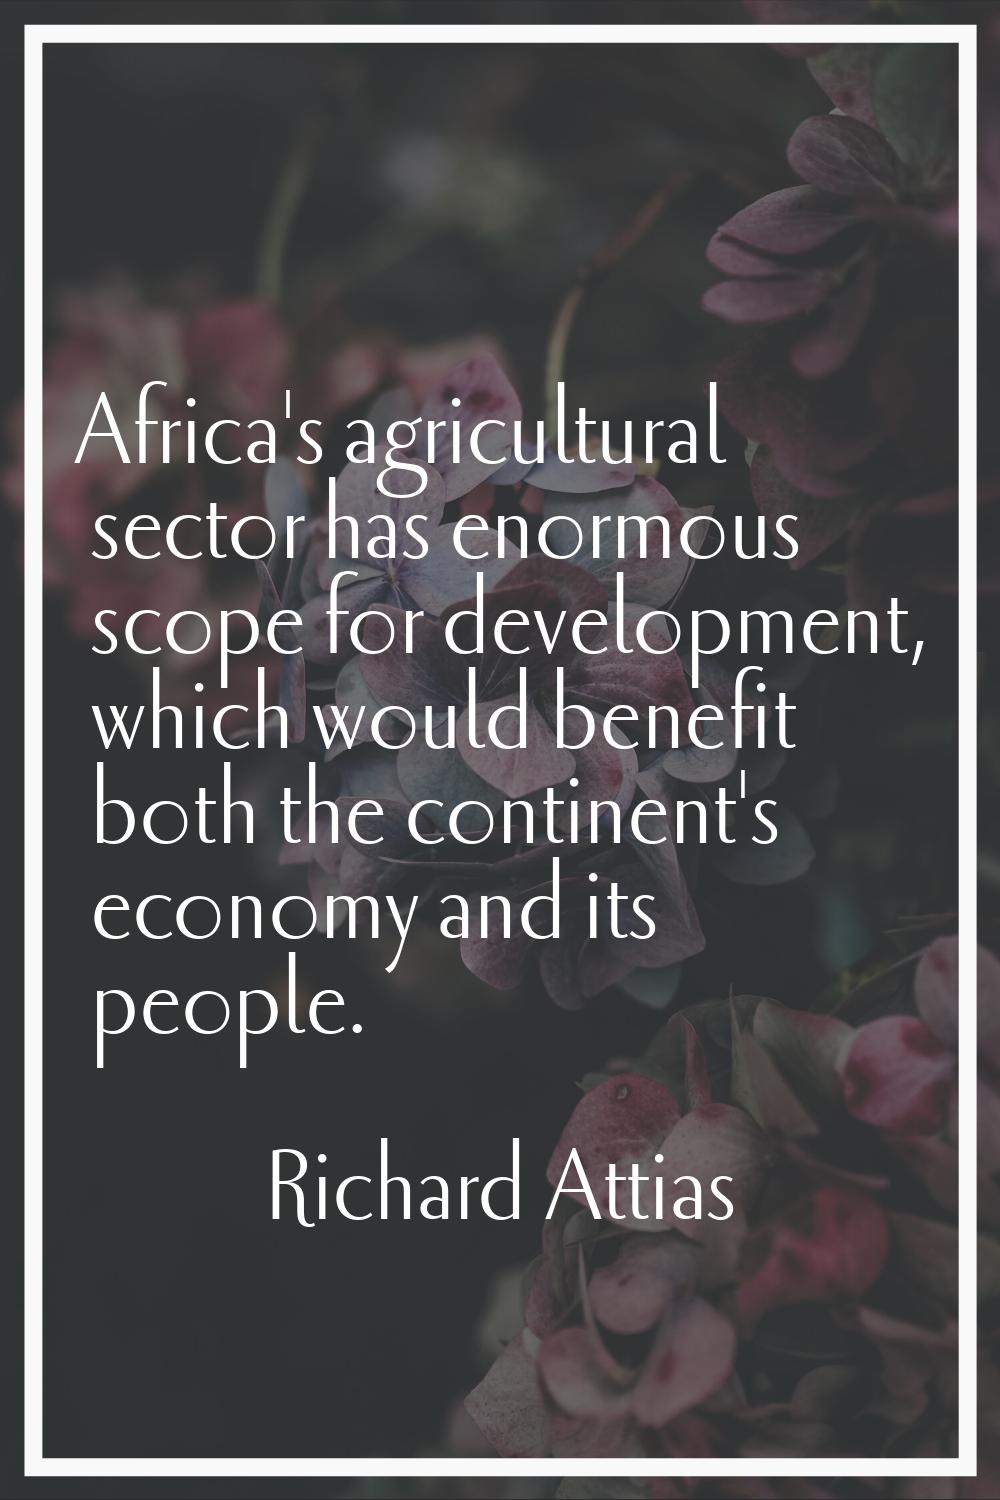 Africa's agricultural sector has enormous scope for development, which would benefit both the conti